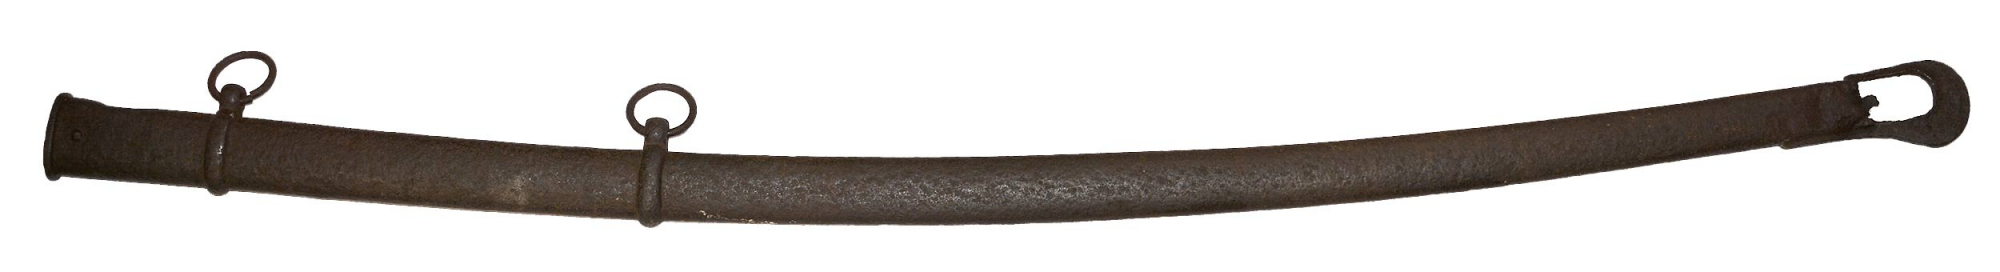 RELIC MODEL 1840 CAVALRY SABER SCABBARD RECOVERED AT FREDERICKSBURG